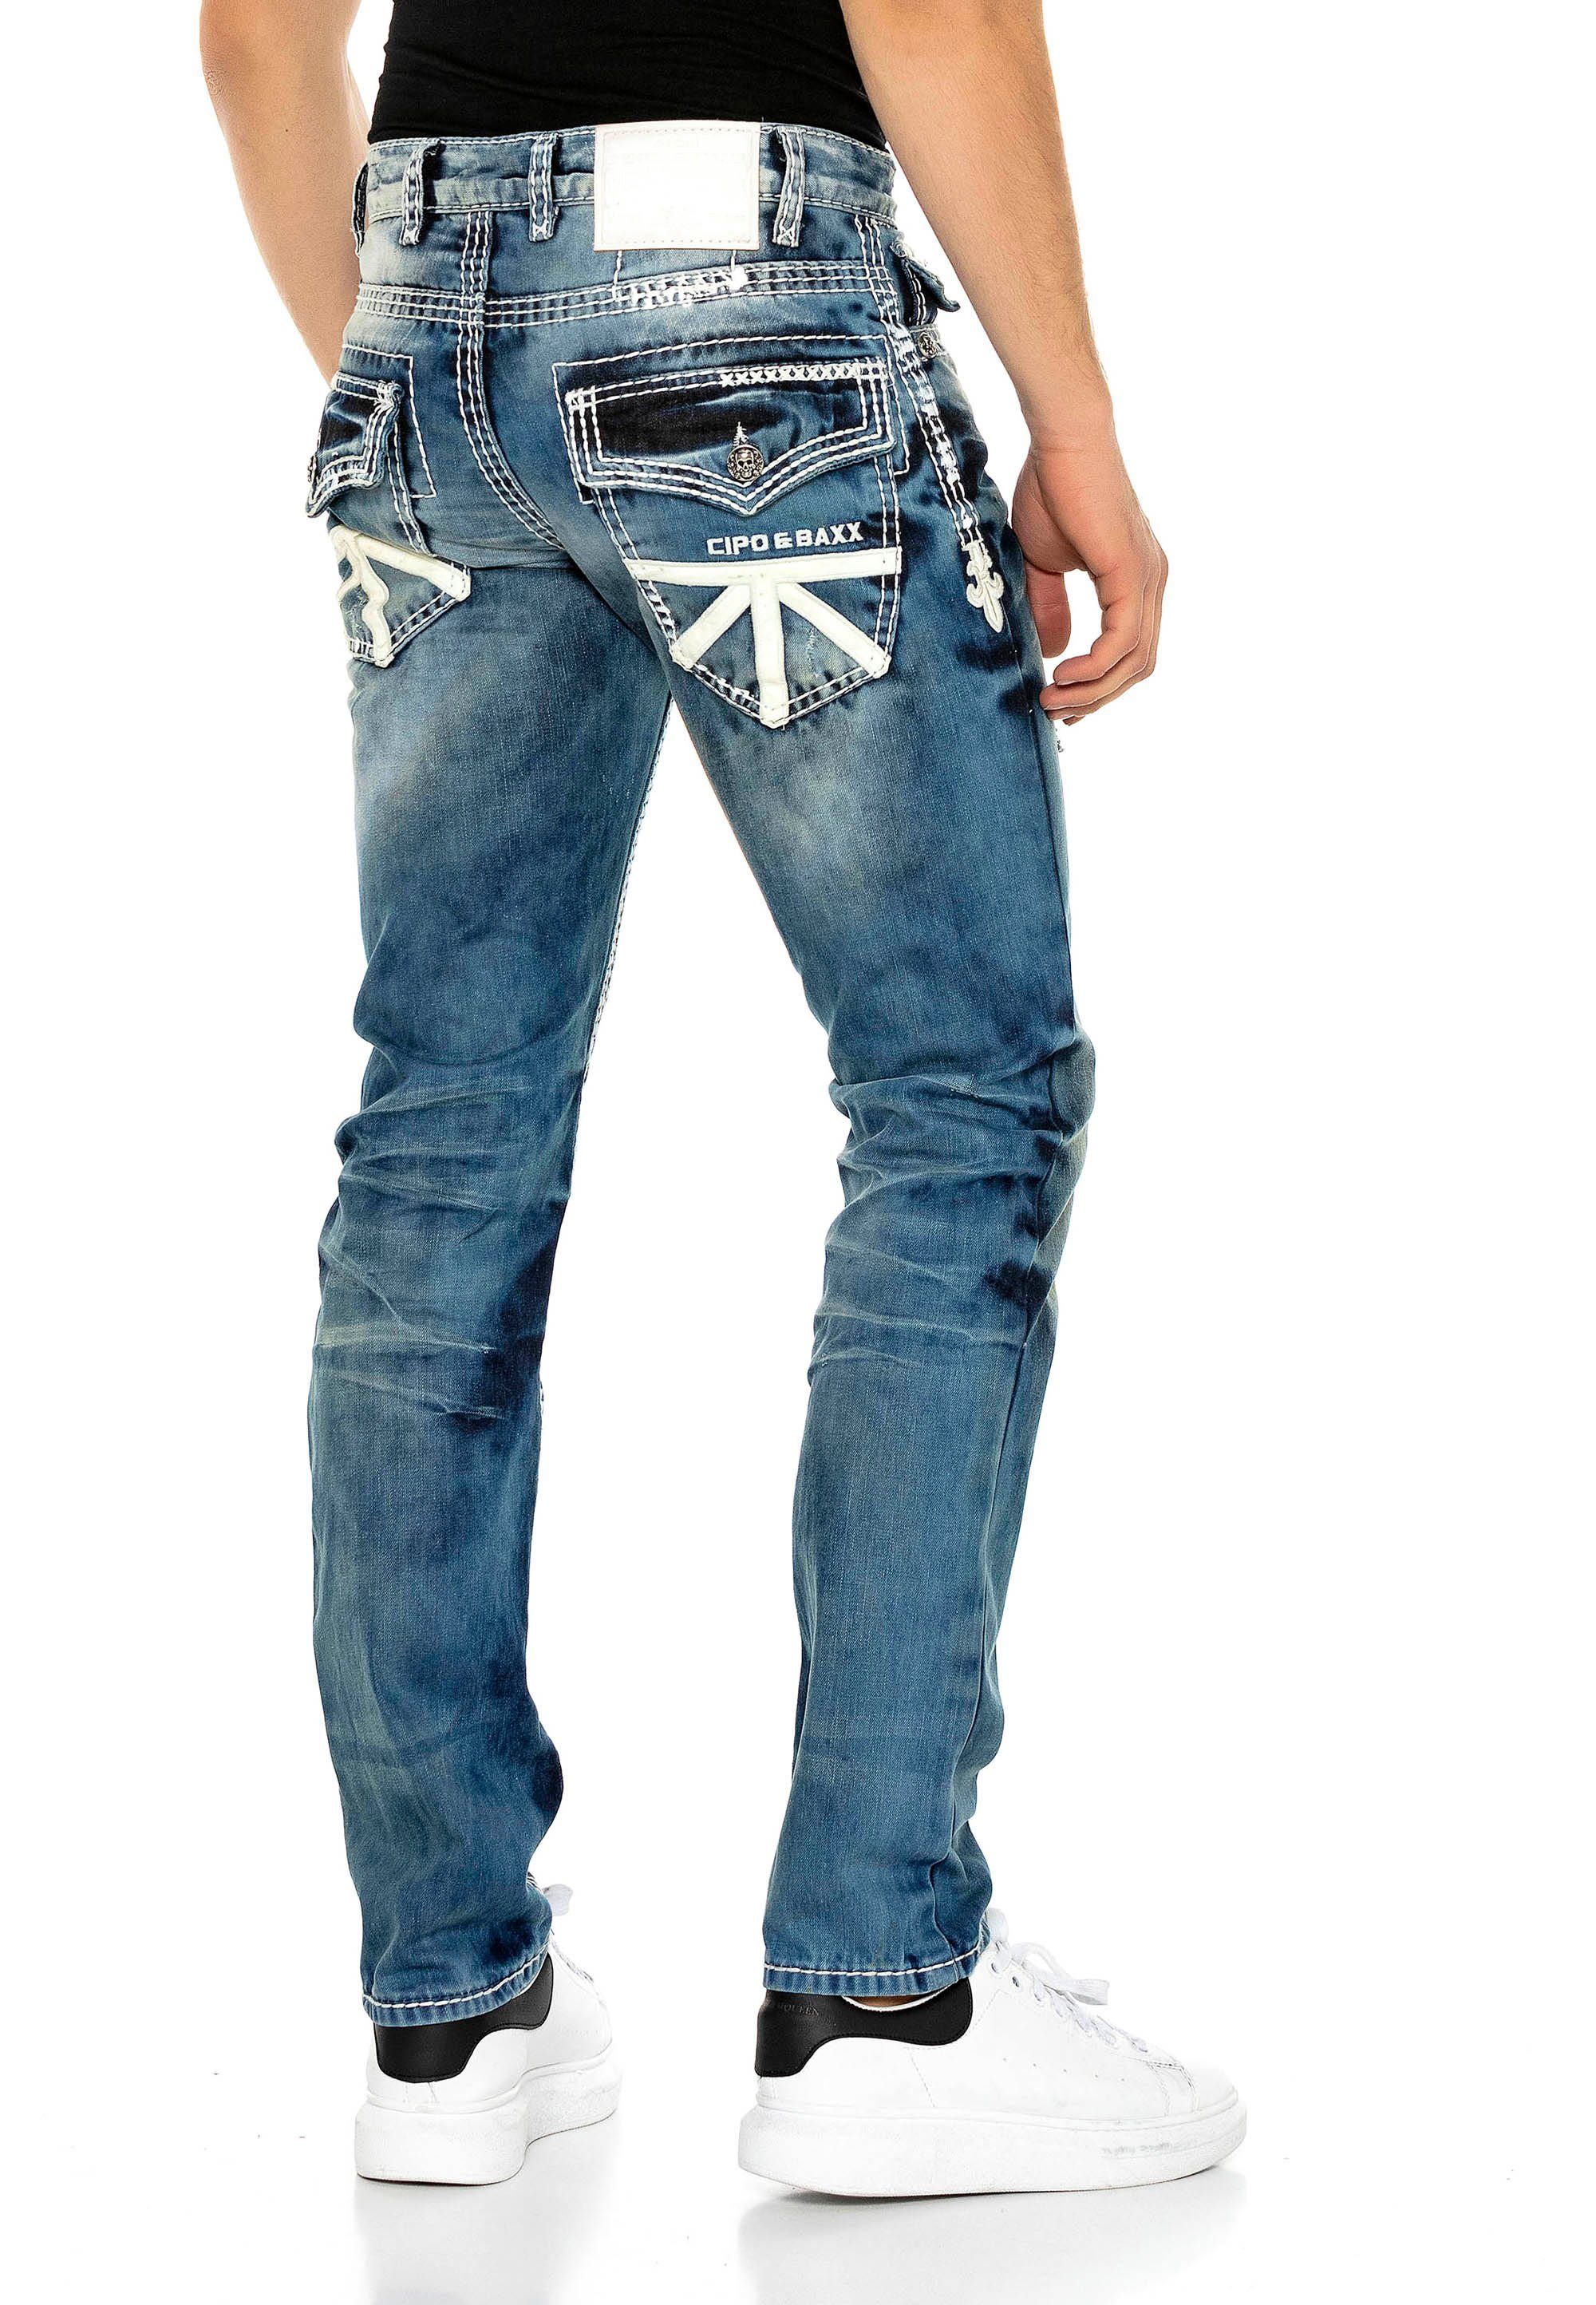 Bequeme Straight im coolen Baxx Cipo Fit Jeans & Used-Look